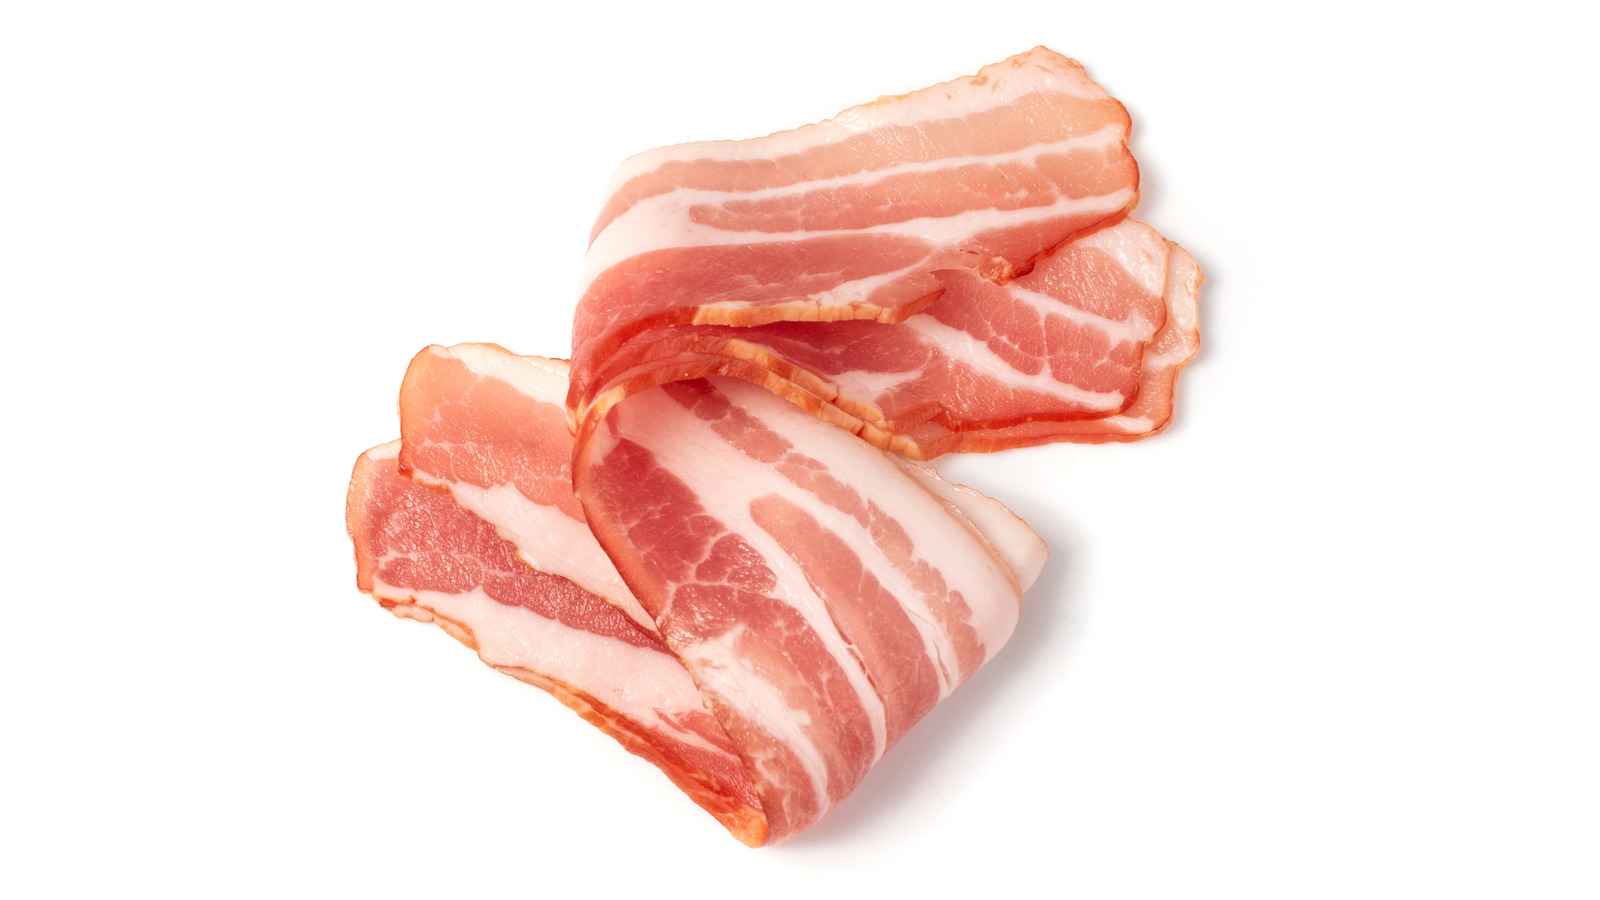 https://www.housedigest.com/img/gallery/how-to-properly-discard-bacon-fat-and-save-your-pipes/l-intro-1652097625.jpg